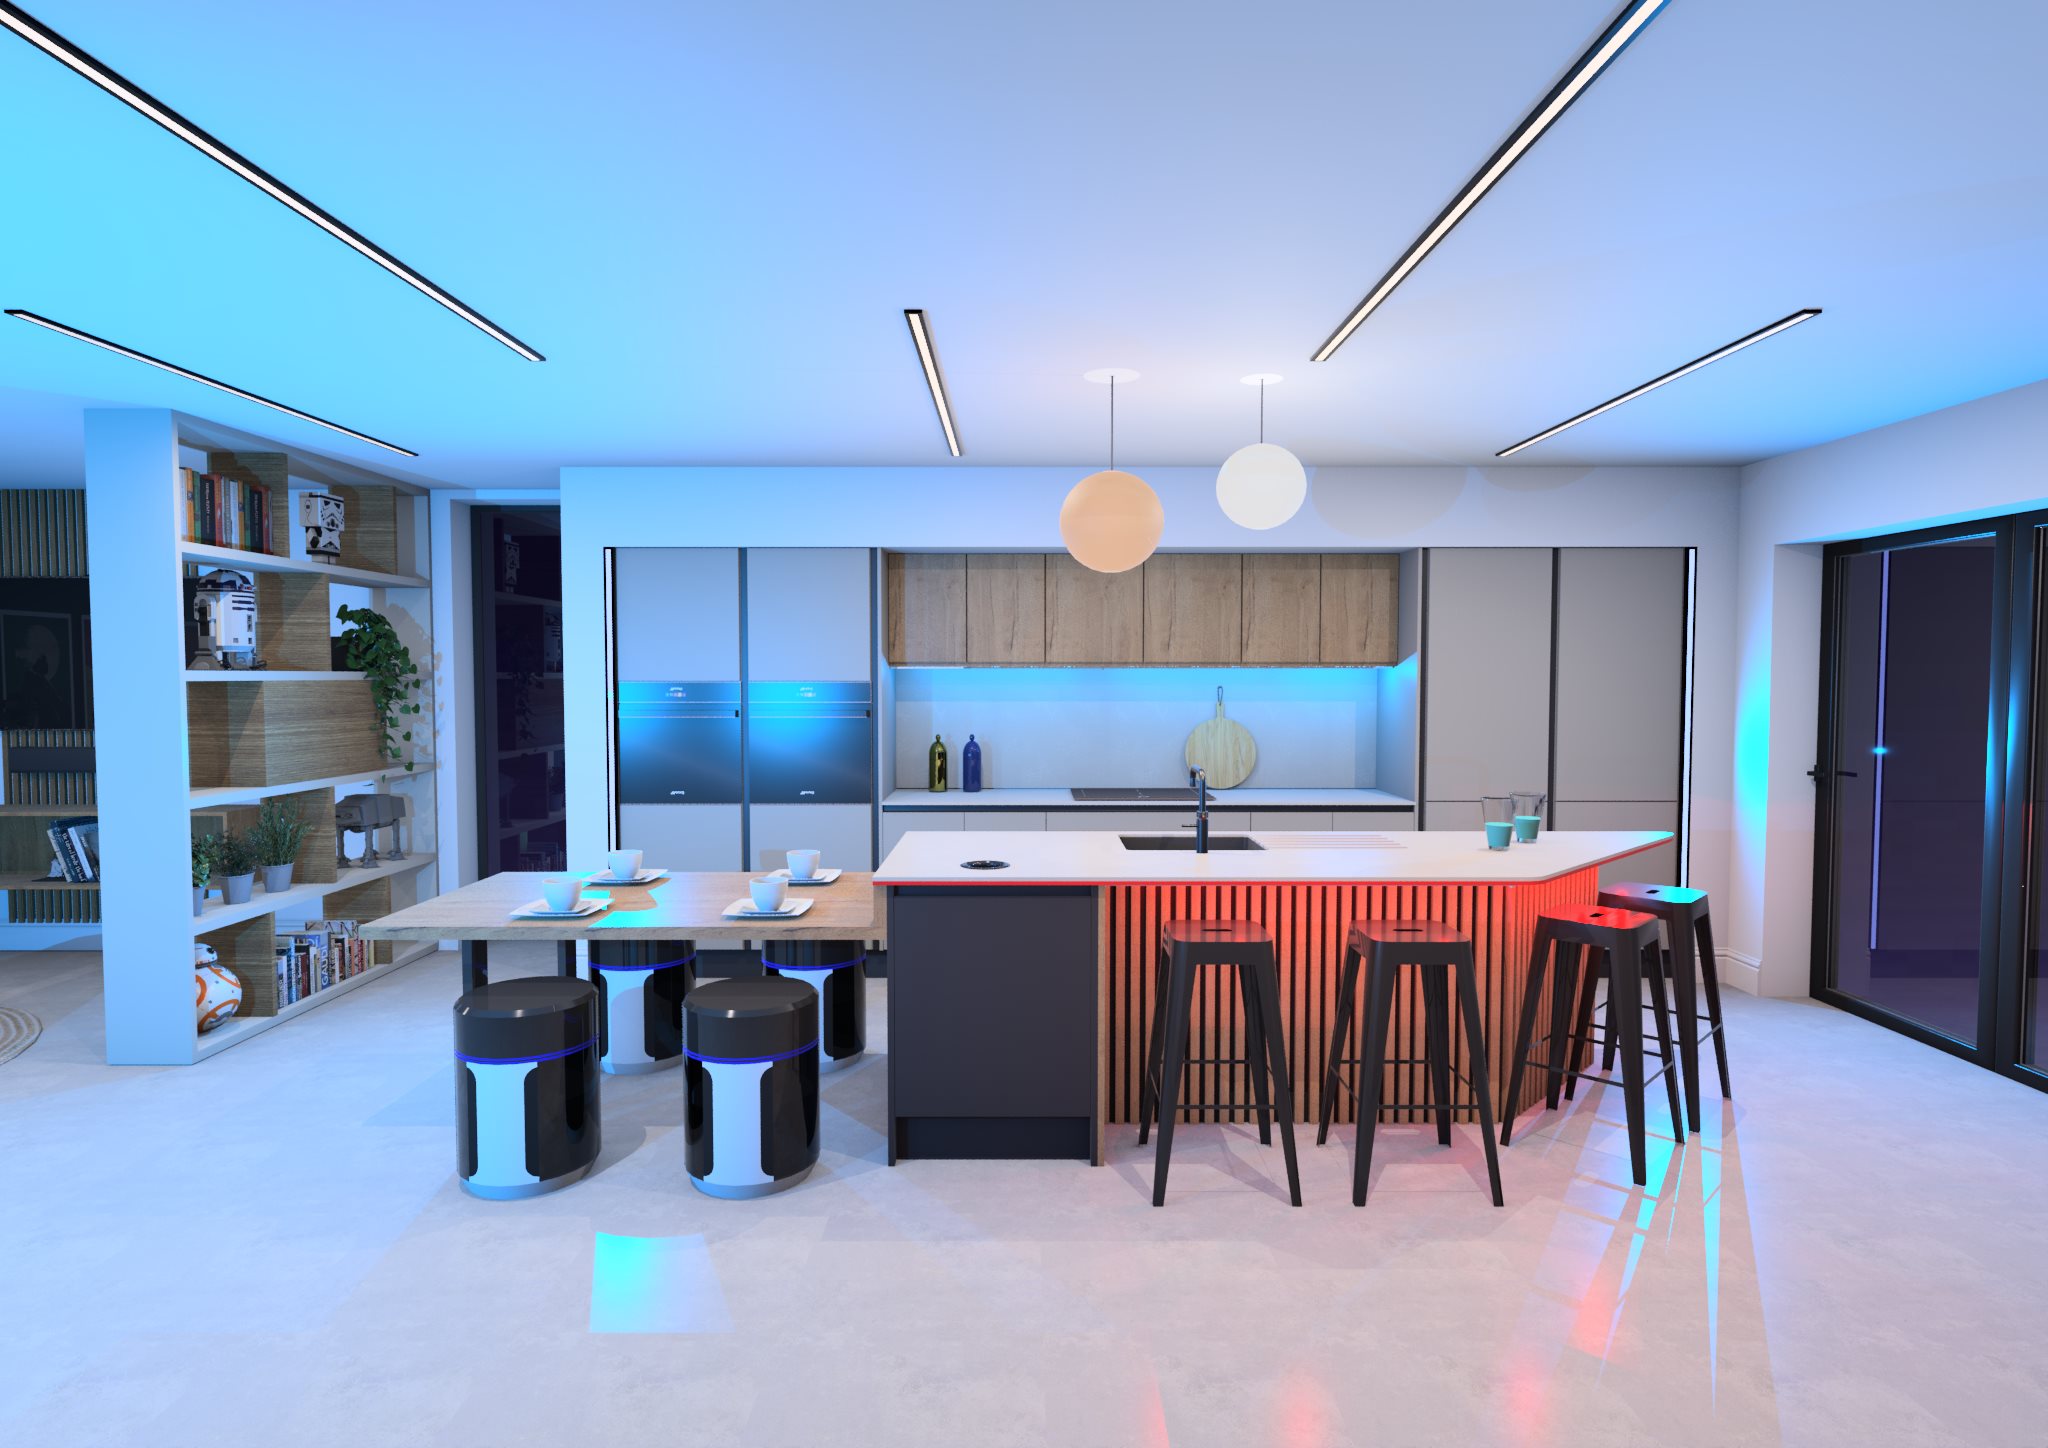 Star Wars Kitchen Designs To Awaken The Force - MOLD :: Designing the  Future of Food